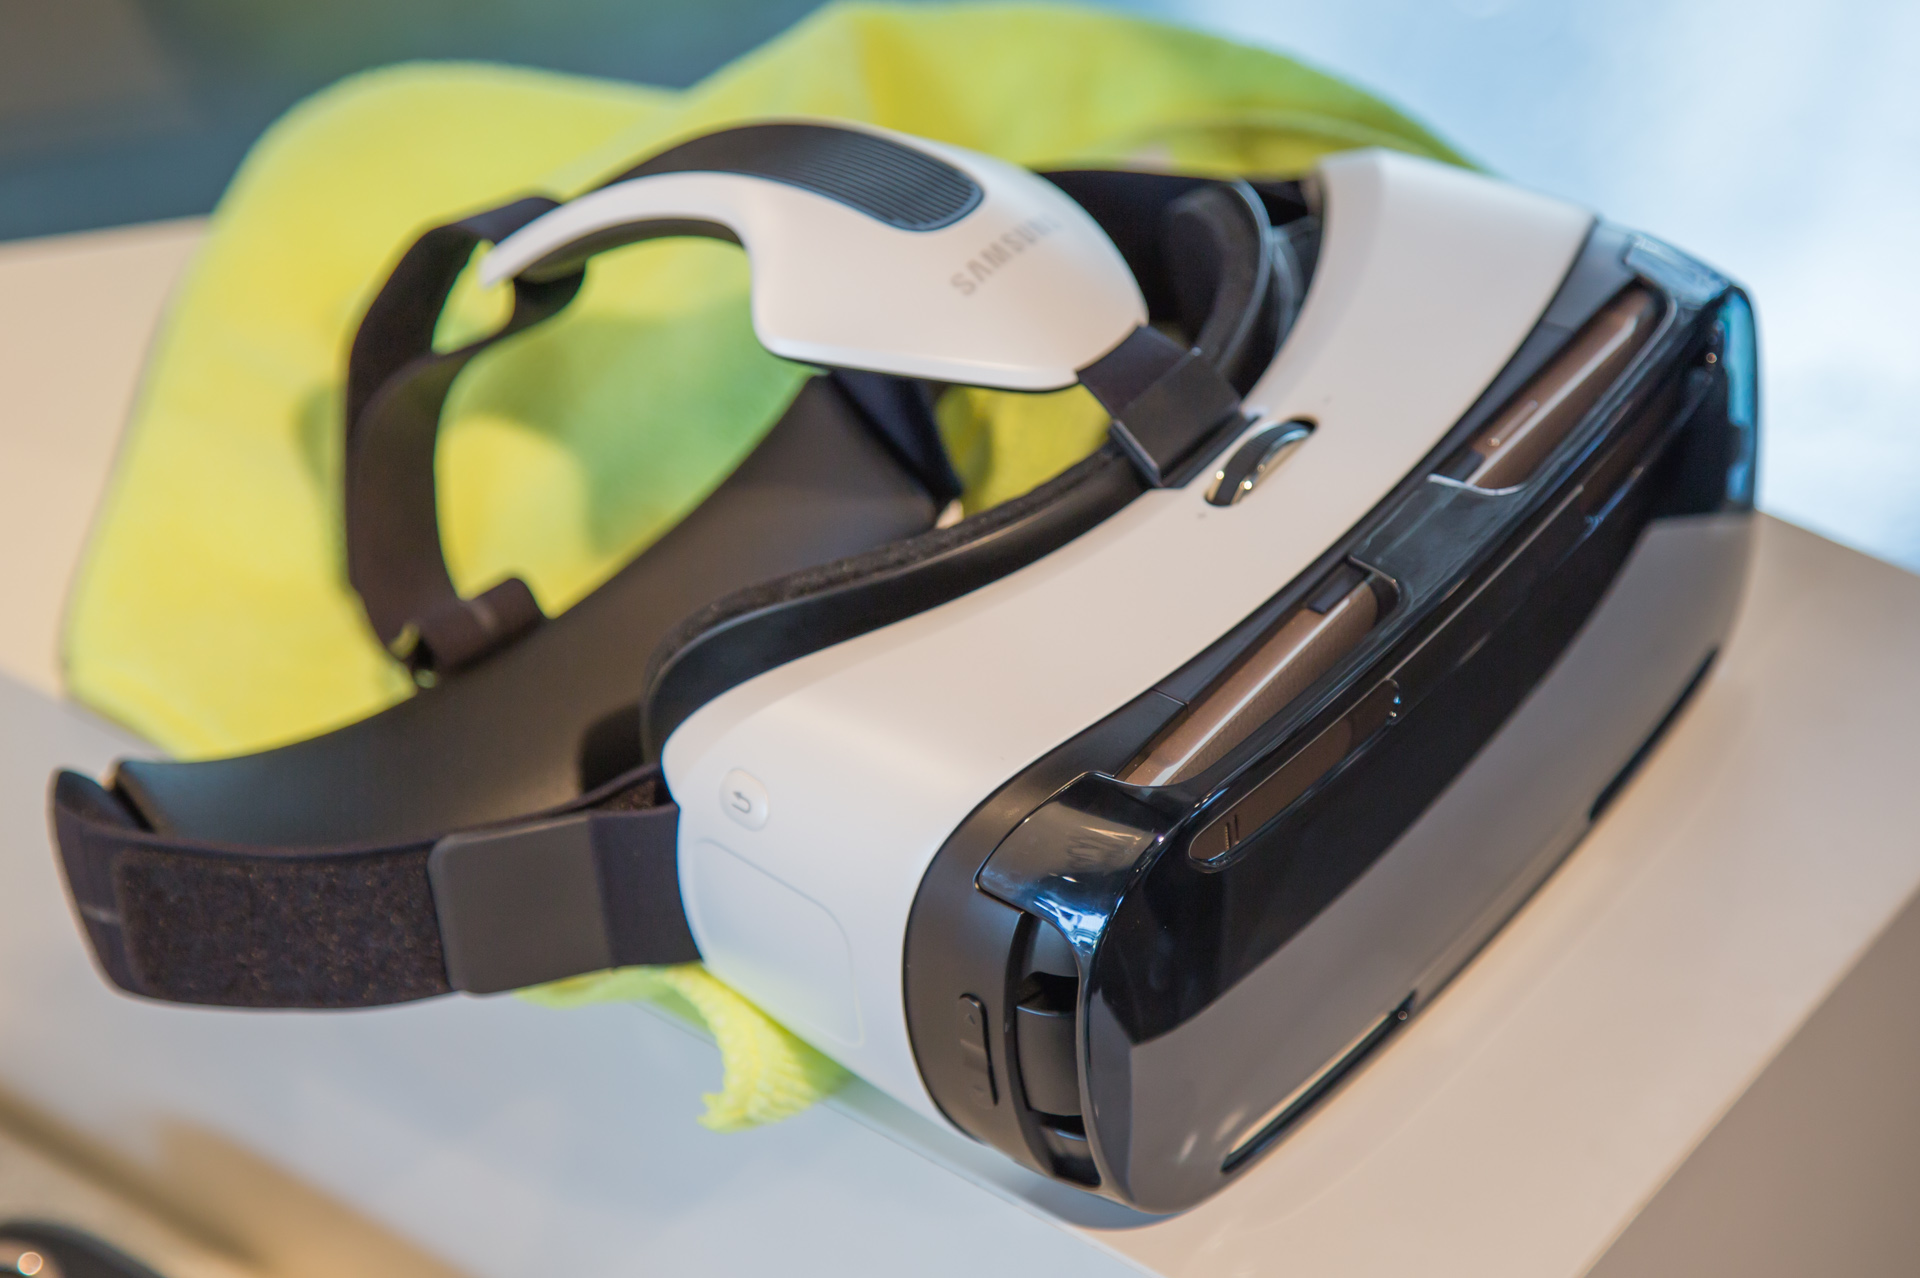 Hands On Gear Vr Is Better Than Smartphone Vr Has A Right To Be Ars